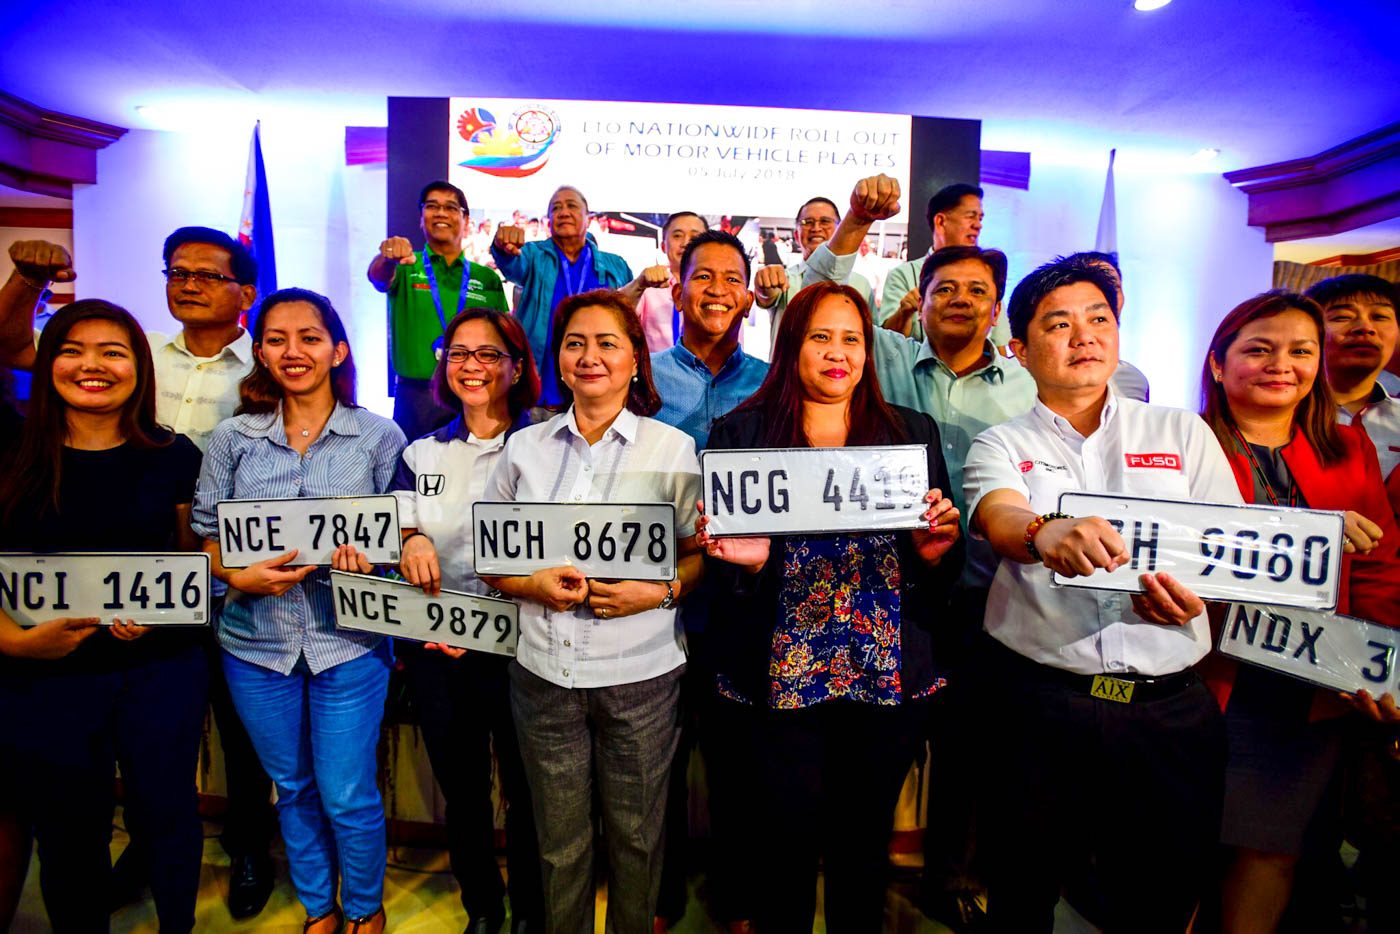 LTO starts distributing license plates after years of backlogs